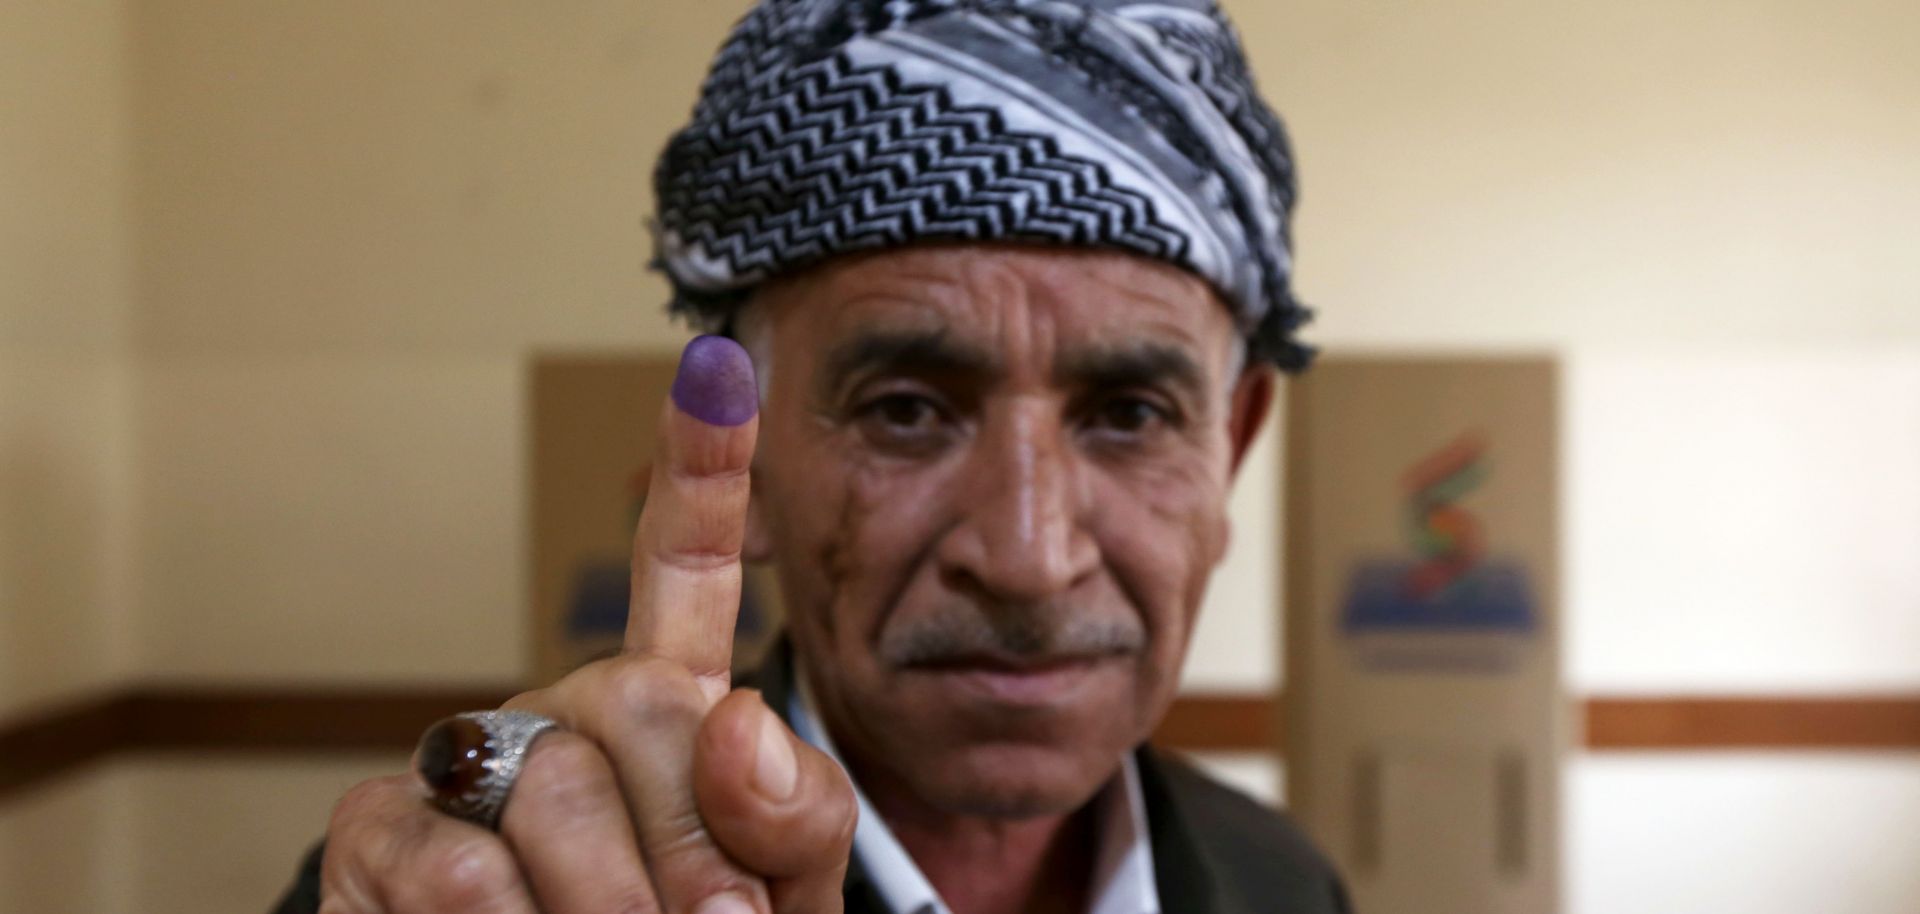 An man shows his ink-stained finger after voting in Iraqi Kurdistan's independence referendum in Arbil on Sept. 25.